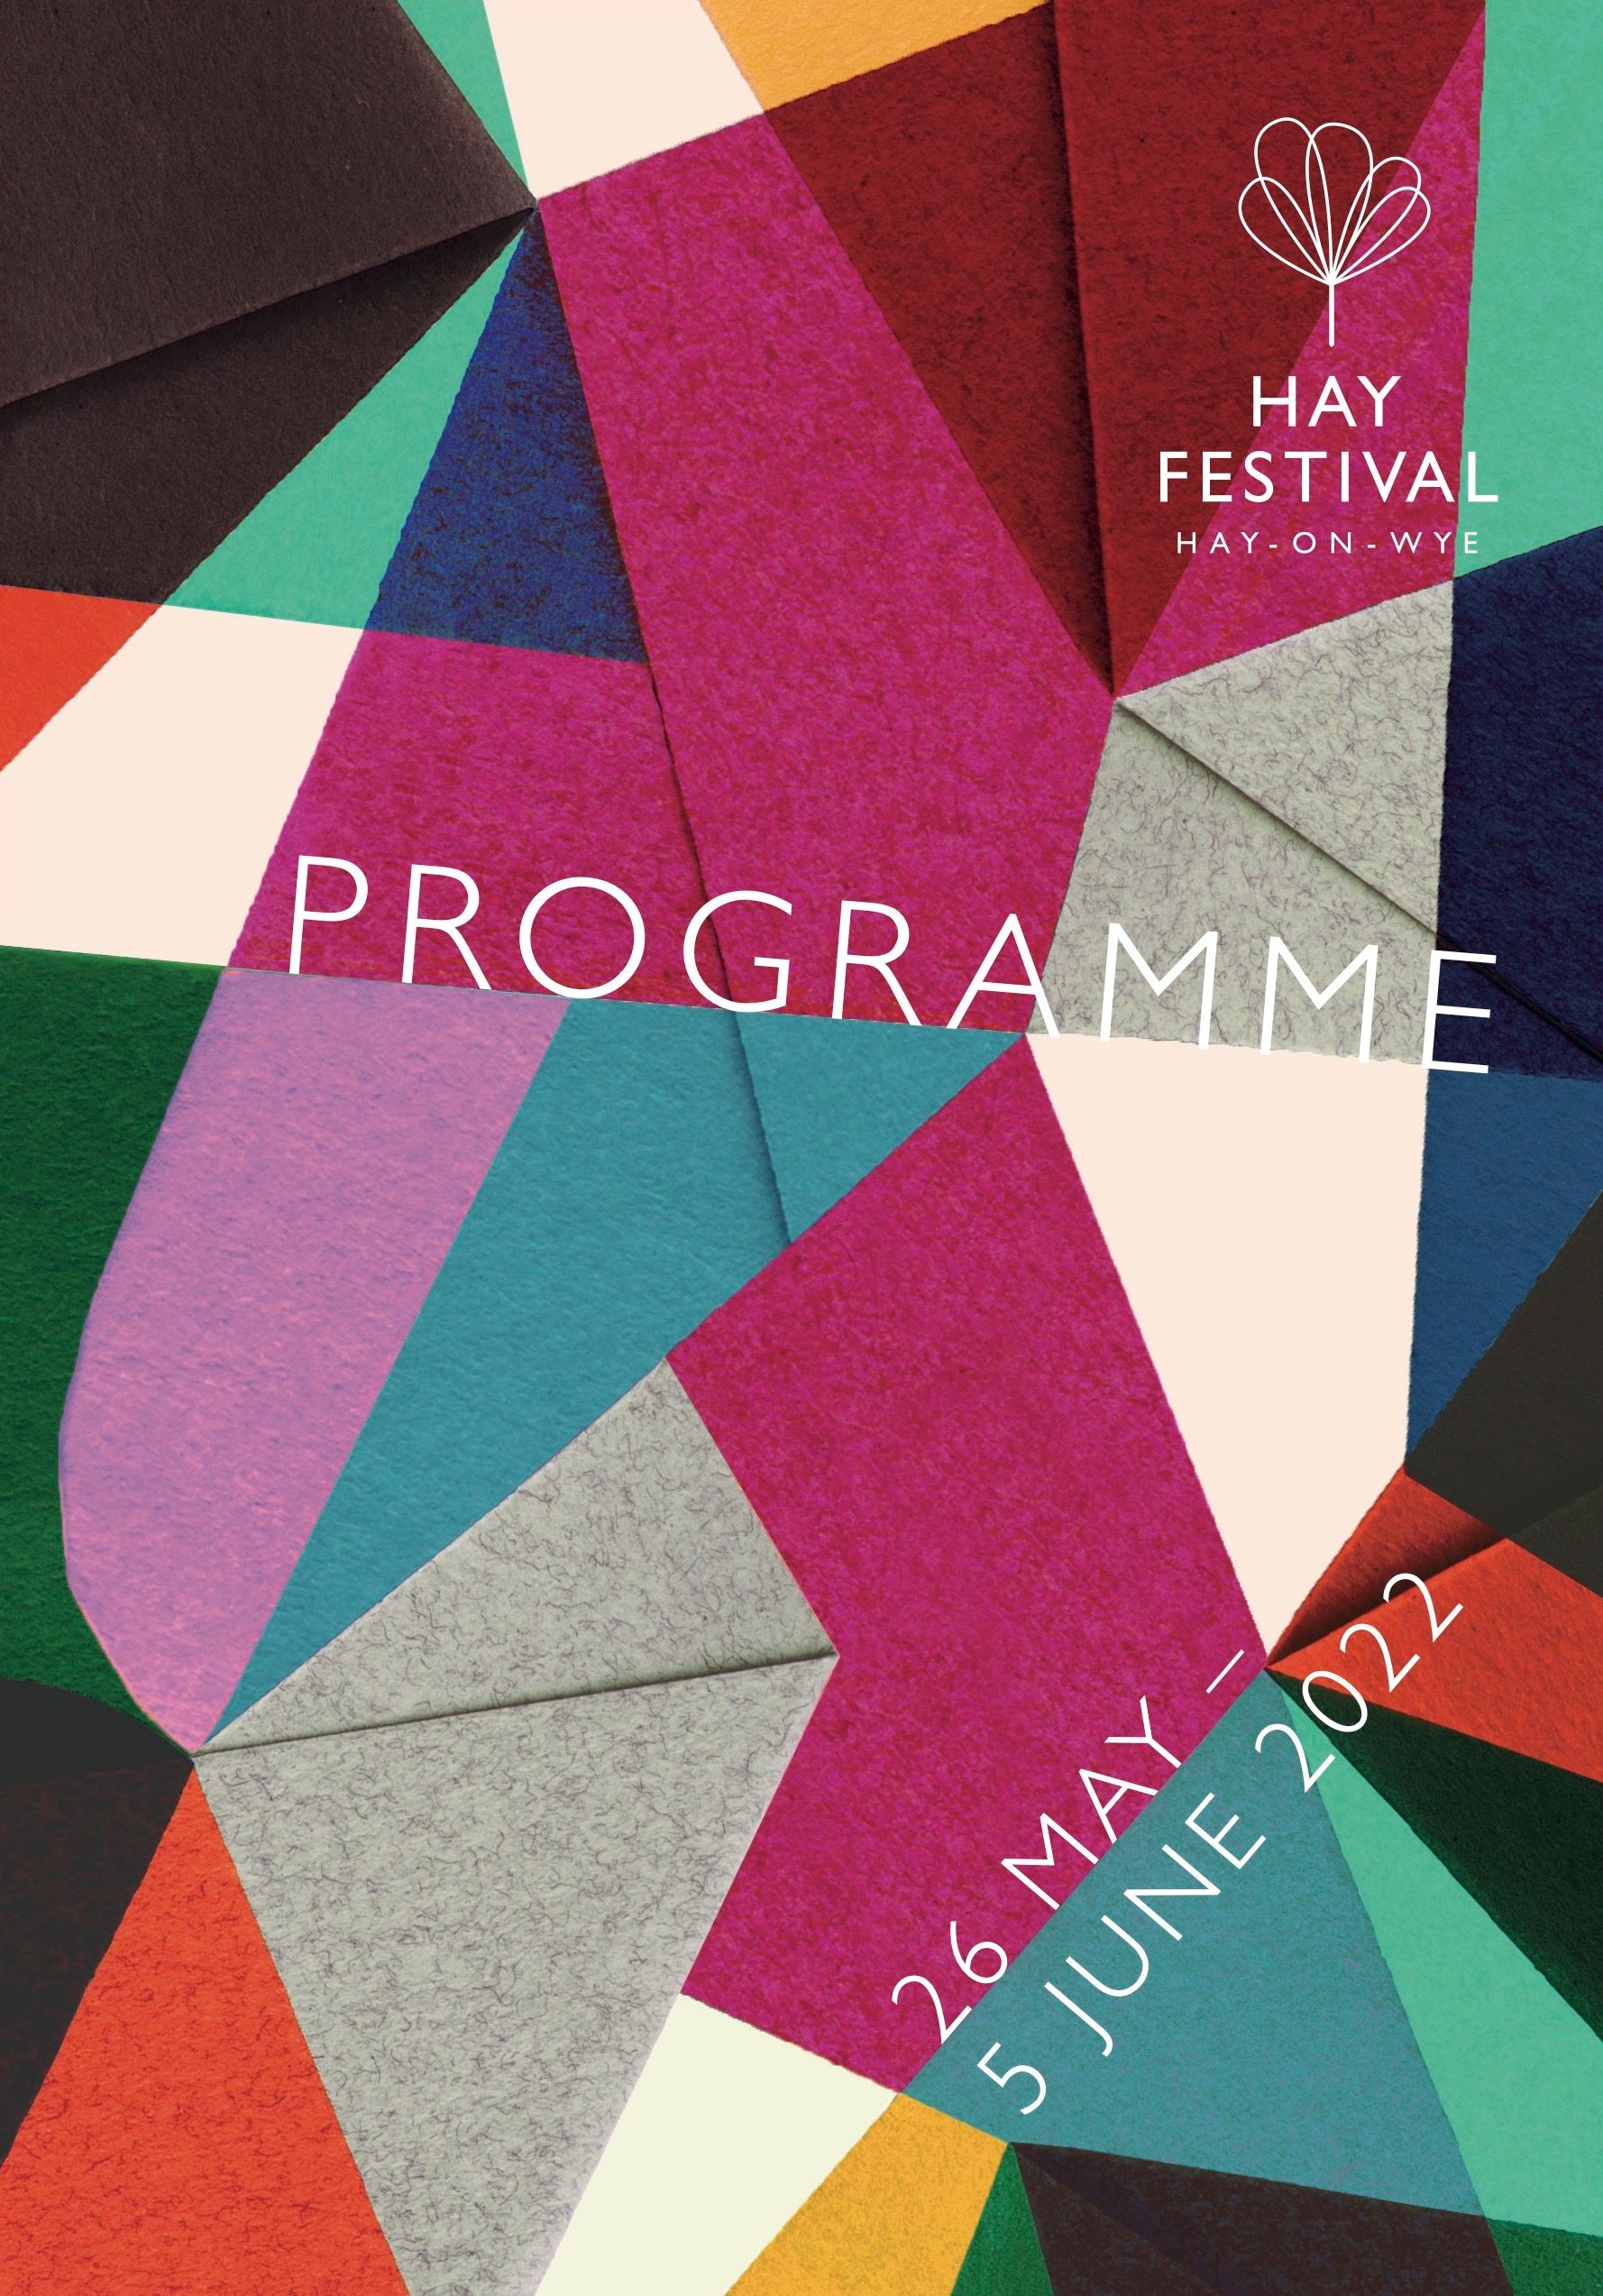 100 DAYS TO HAY FESTIVAL 2022A PREVIEW OF THE VIBRANT PROGRAMME TO COME